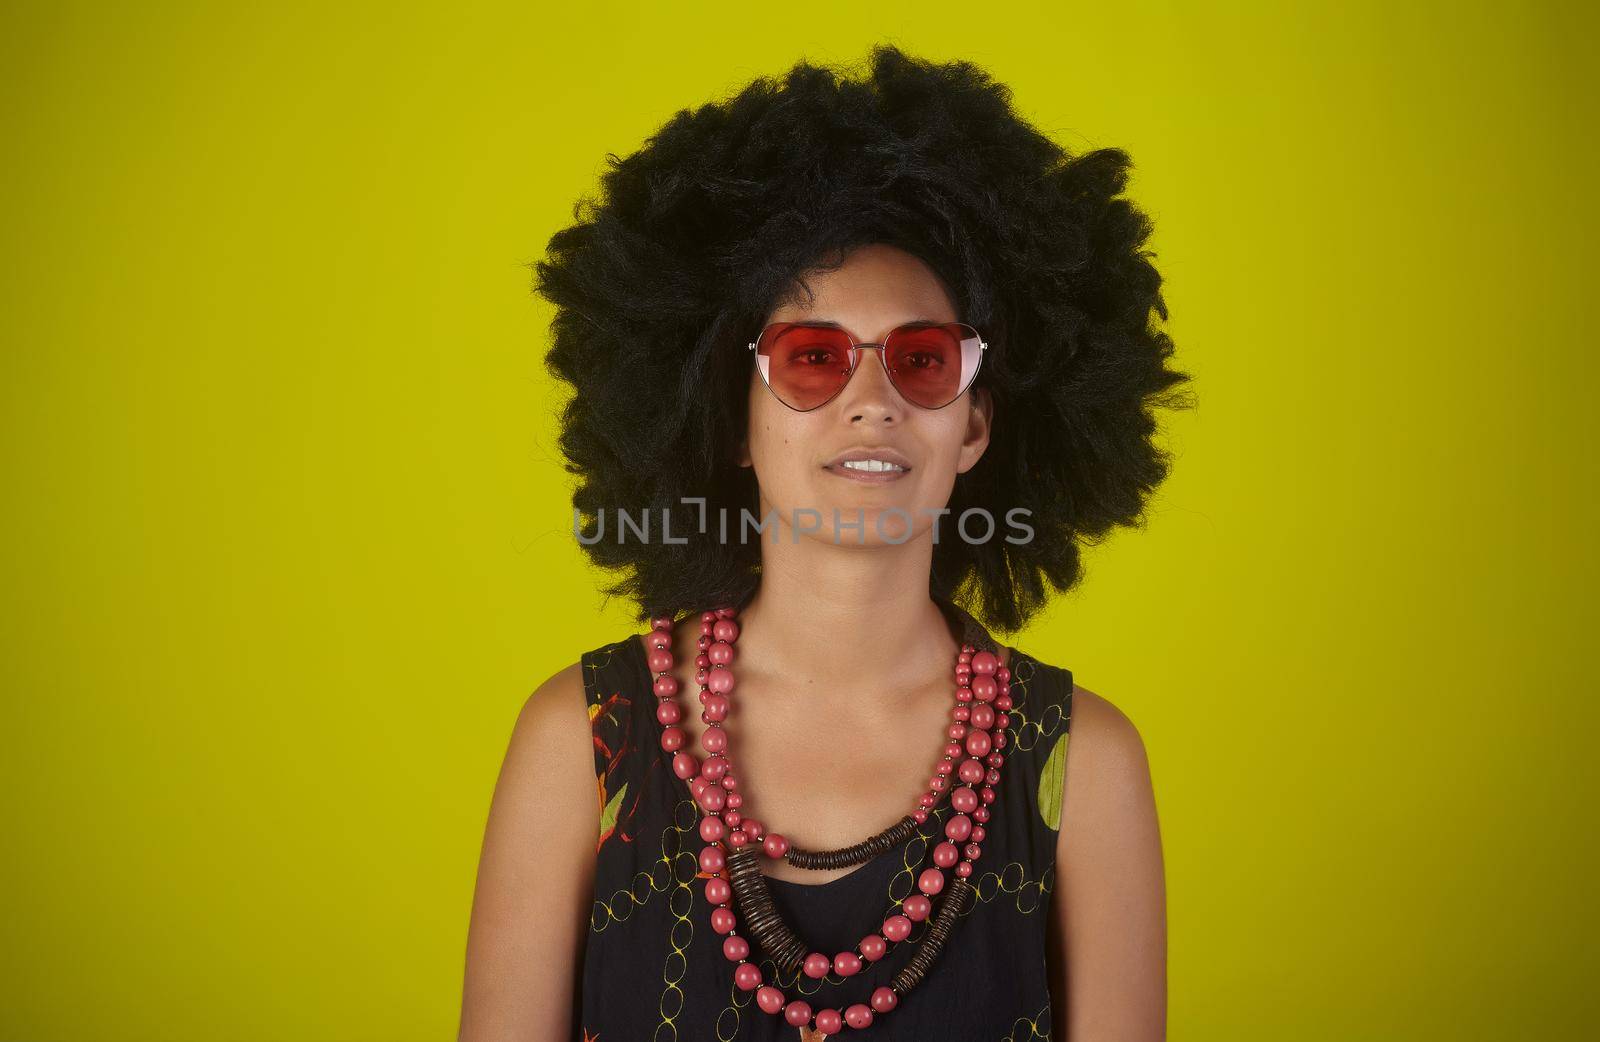 Smiling woman with afro curly hairstyle on yellow background by bepsimage